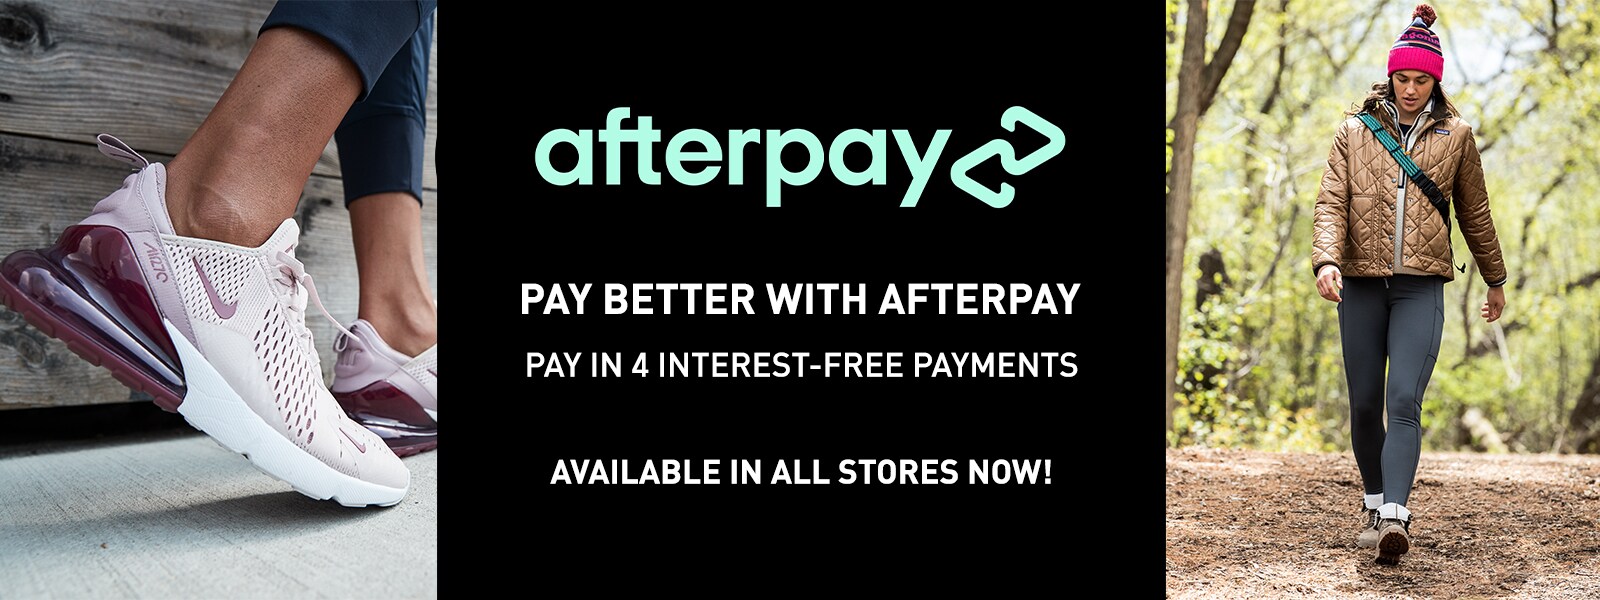 Afterpay Details | DICK'S Sporting Goods